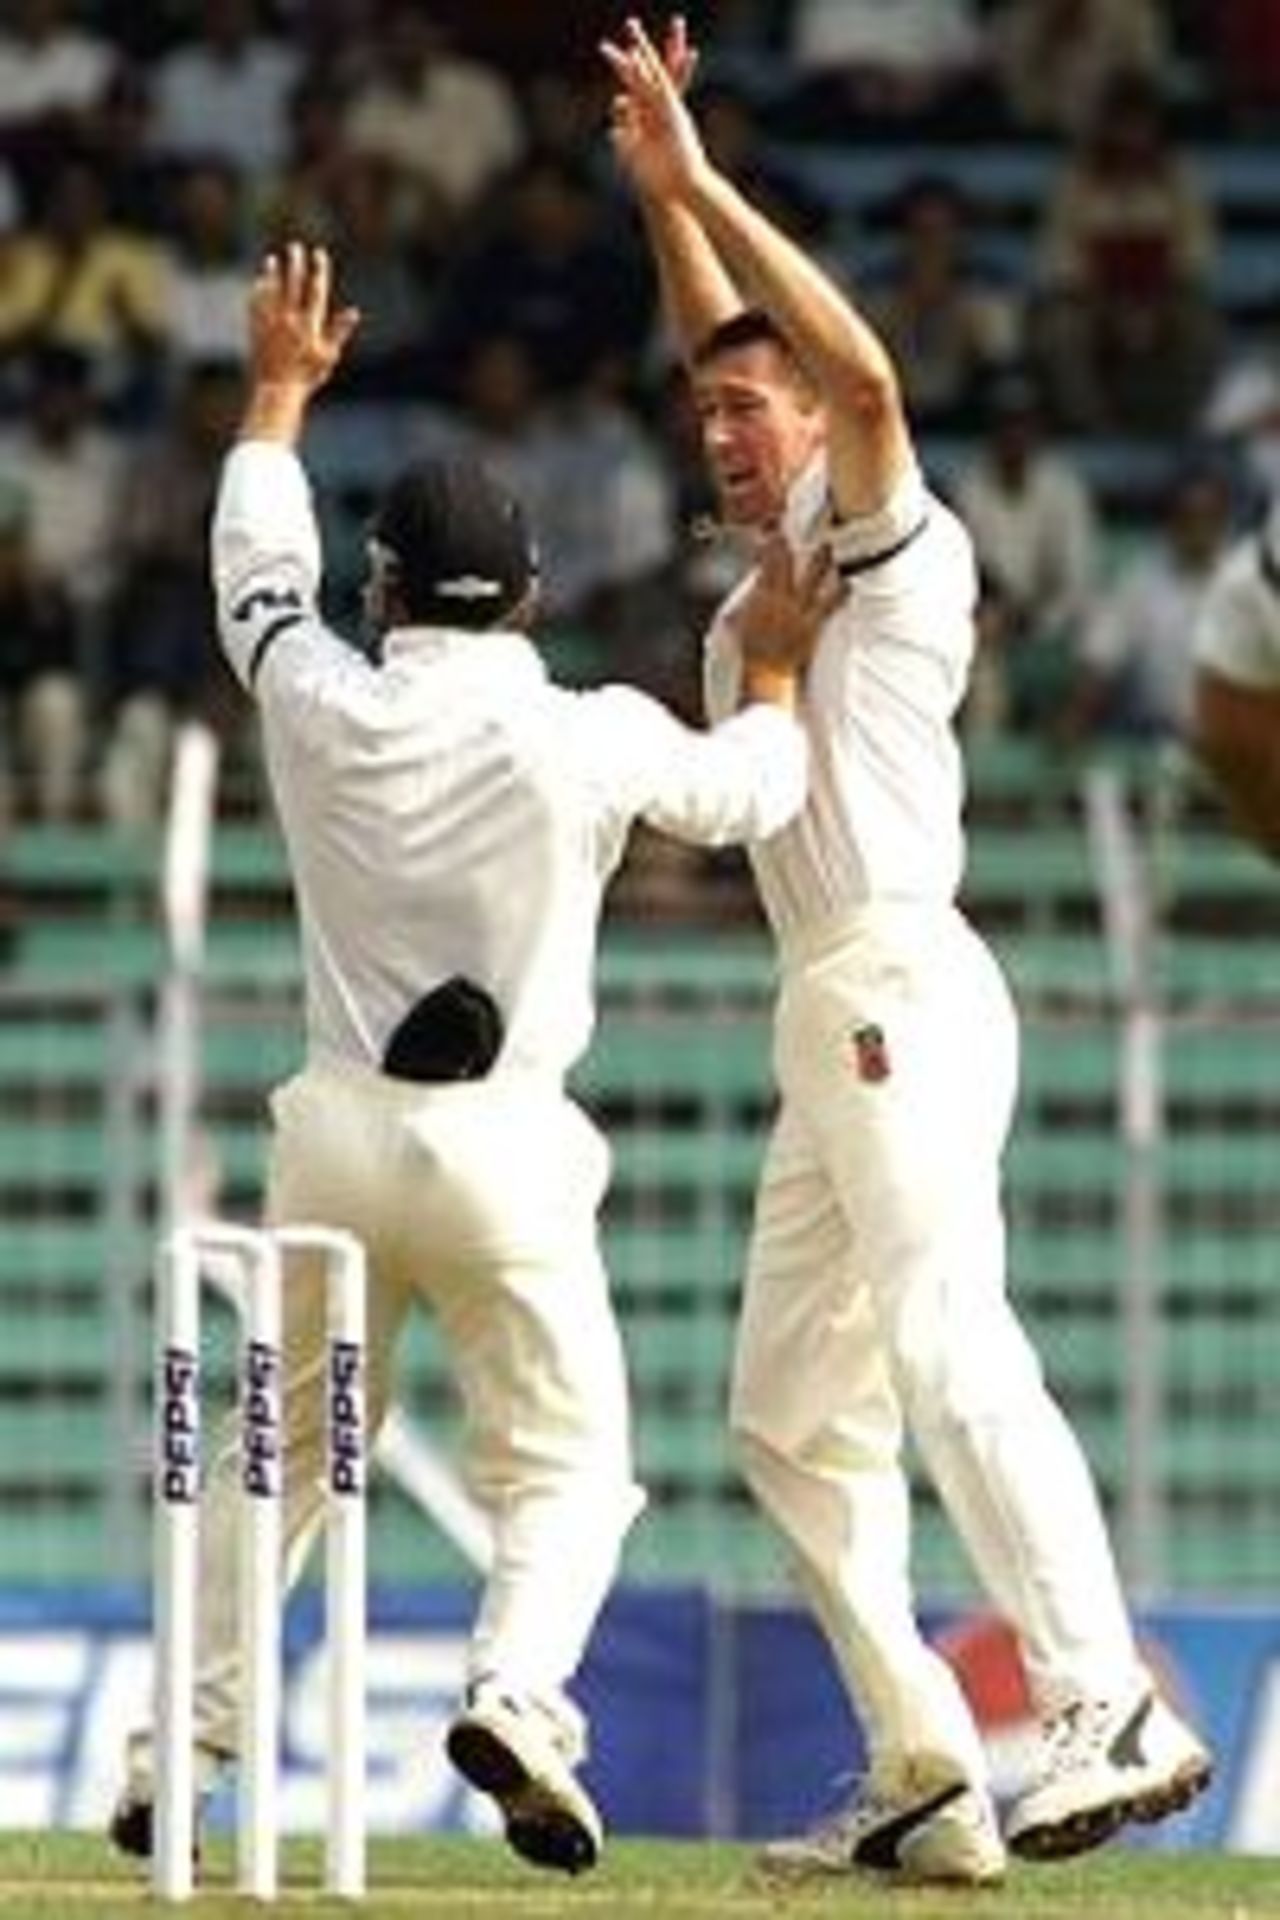 27 Feb 2001: Glenn McGrath (right) and Justin Langer of Australia celebrate after Sadagopan Ramesh of India was caught by Adam Gilchrist off McGrath's bowling for two, during day one of the first test between India and Australia, played Wankhede Stadium, Mumbai, India.